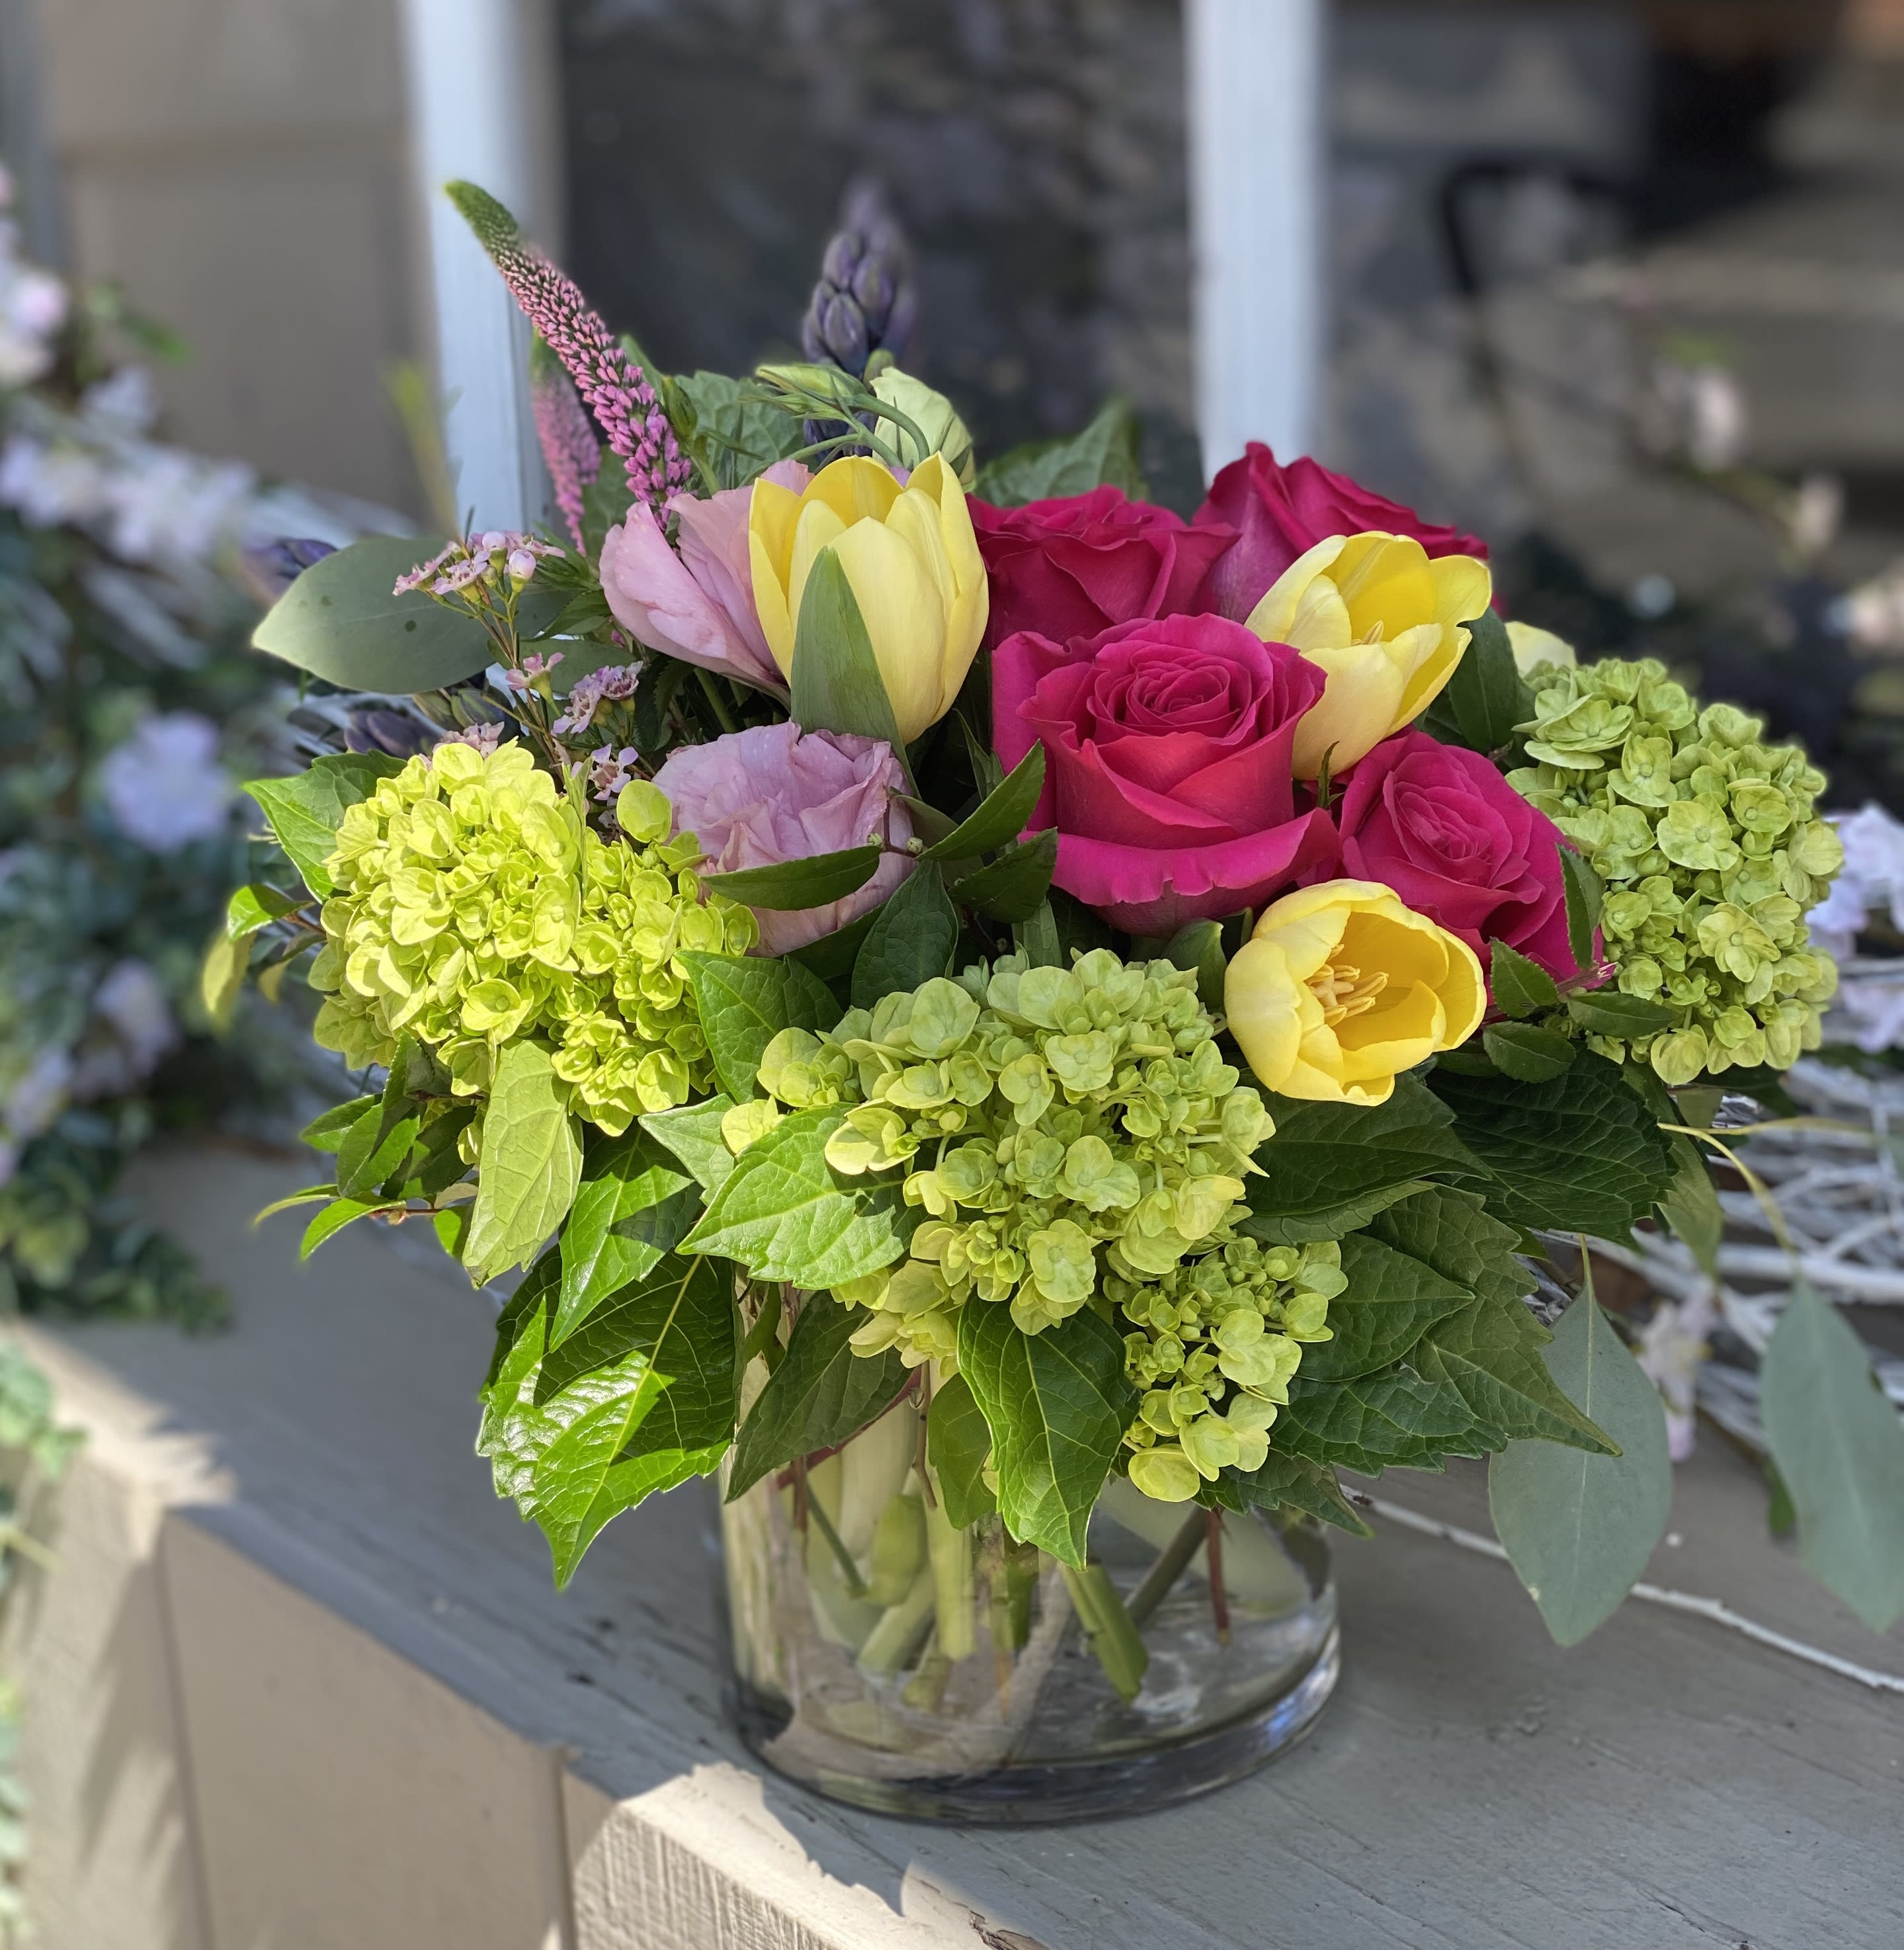 Good Vibes  - Send the message of cheer and love with this arrangement of fresh-cut flowers in bright colors of yellow, magenta pink and lime green. Roses, Tulips and Hydrangea are always a best selling combination sure to delight someone you care about.   Arrangement is approximately 10&quot; high x 10&quot; wide.  COVID NOTICE: Due to an international shortage of flowers and vases and floral supply chain issues, it may be necessary to substitute similar flowers and the vase used in this design. We always strive to create a design as close as possible to the design shown. If you have any questions regarding these changes, please call and talk to a team member before placing your order, (703) 779-3530. 